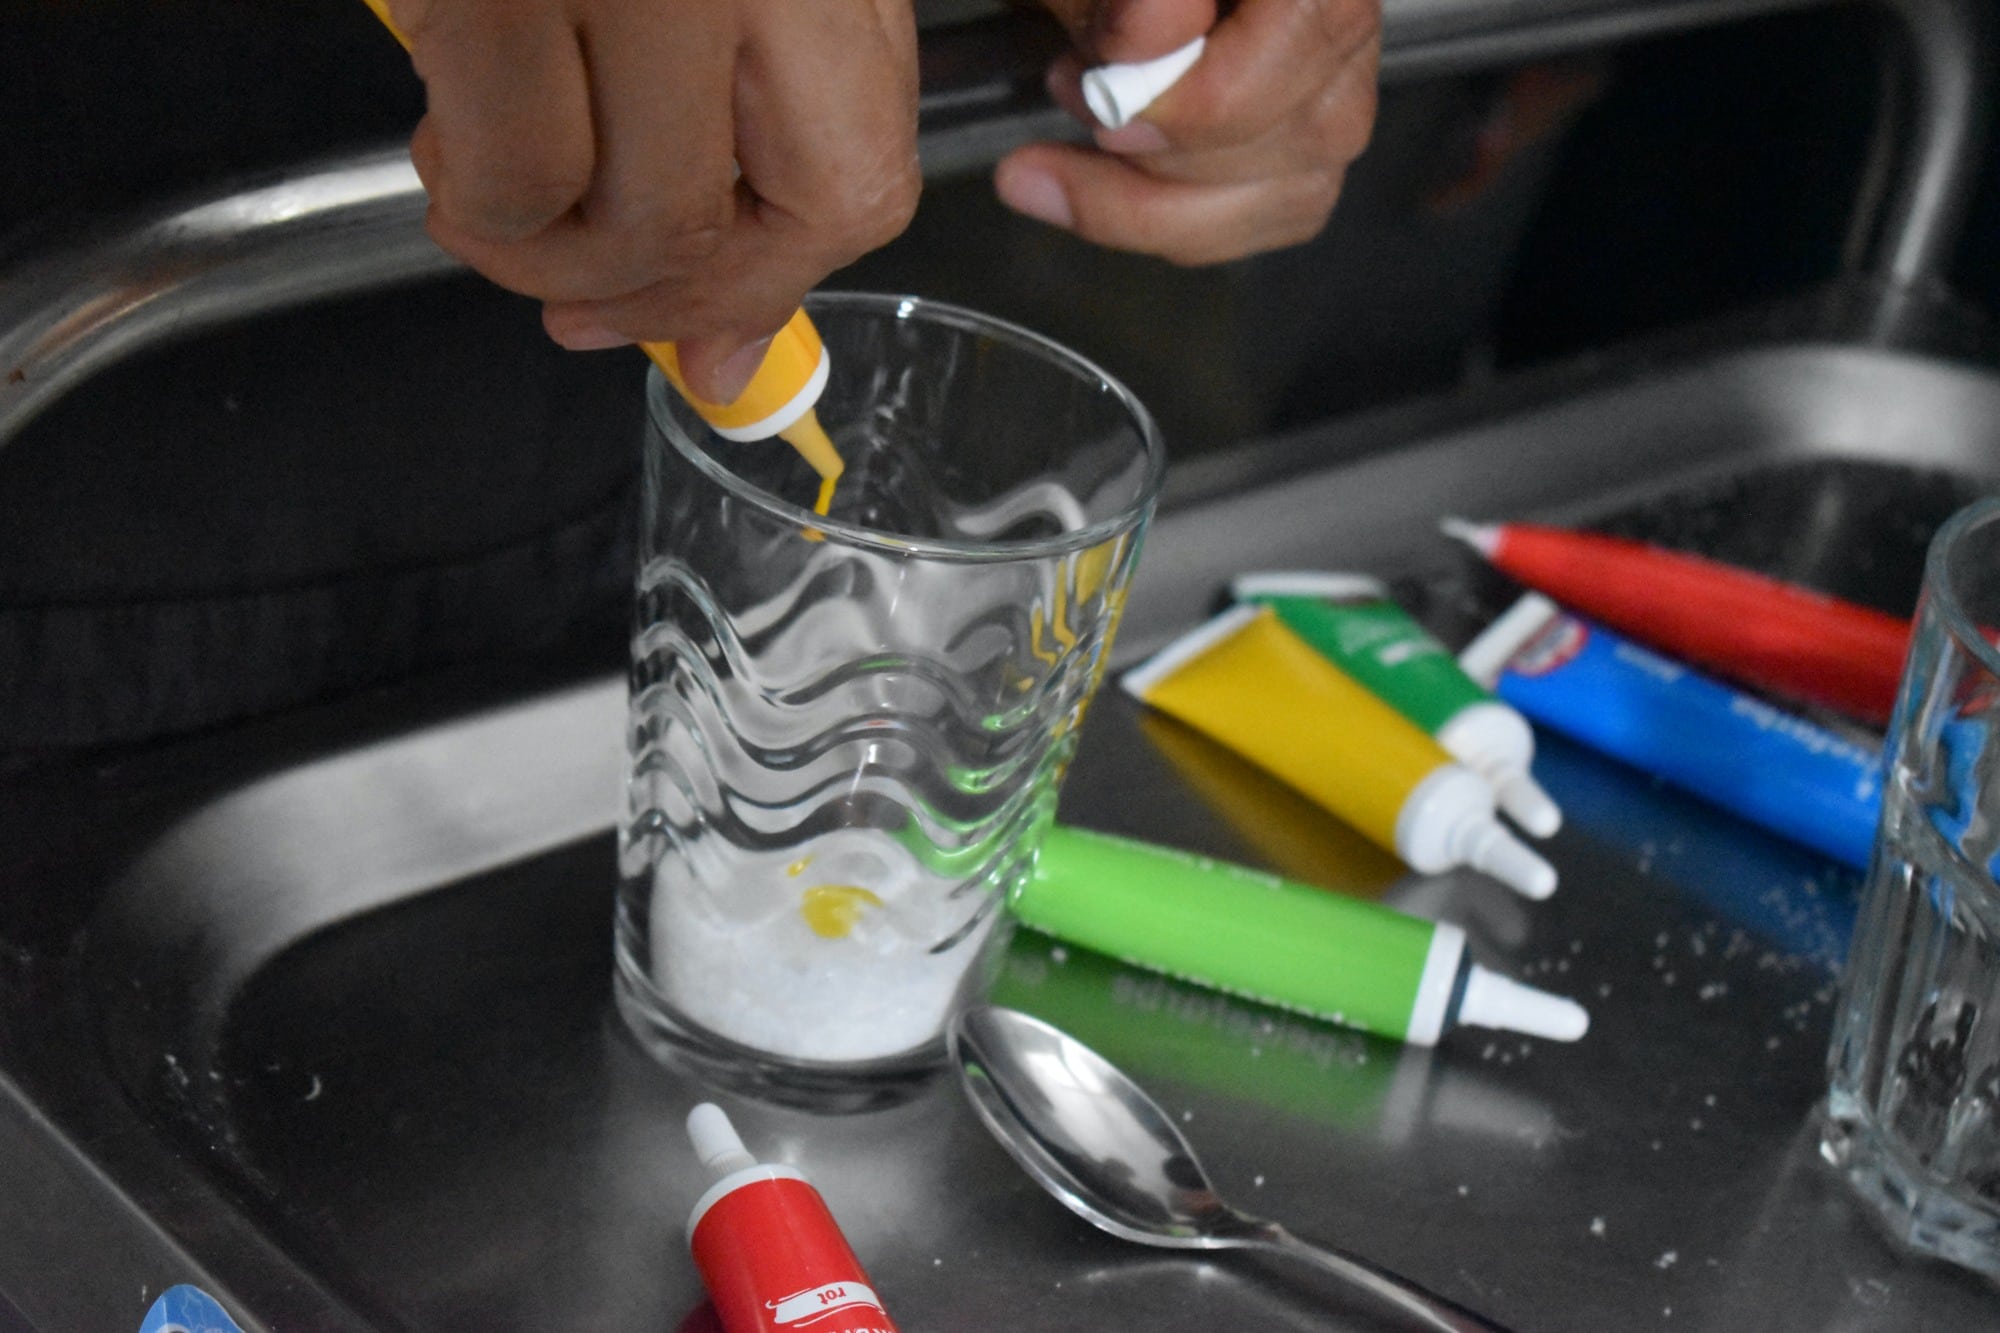 a hand squeezes yellow paint or food coloring into a glass